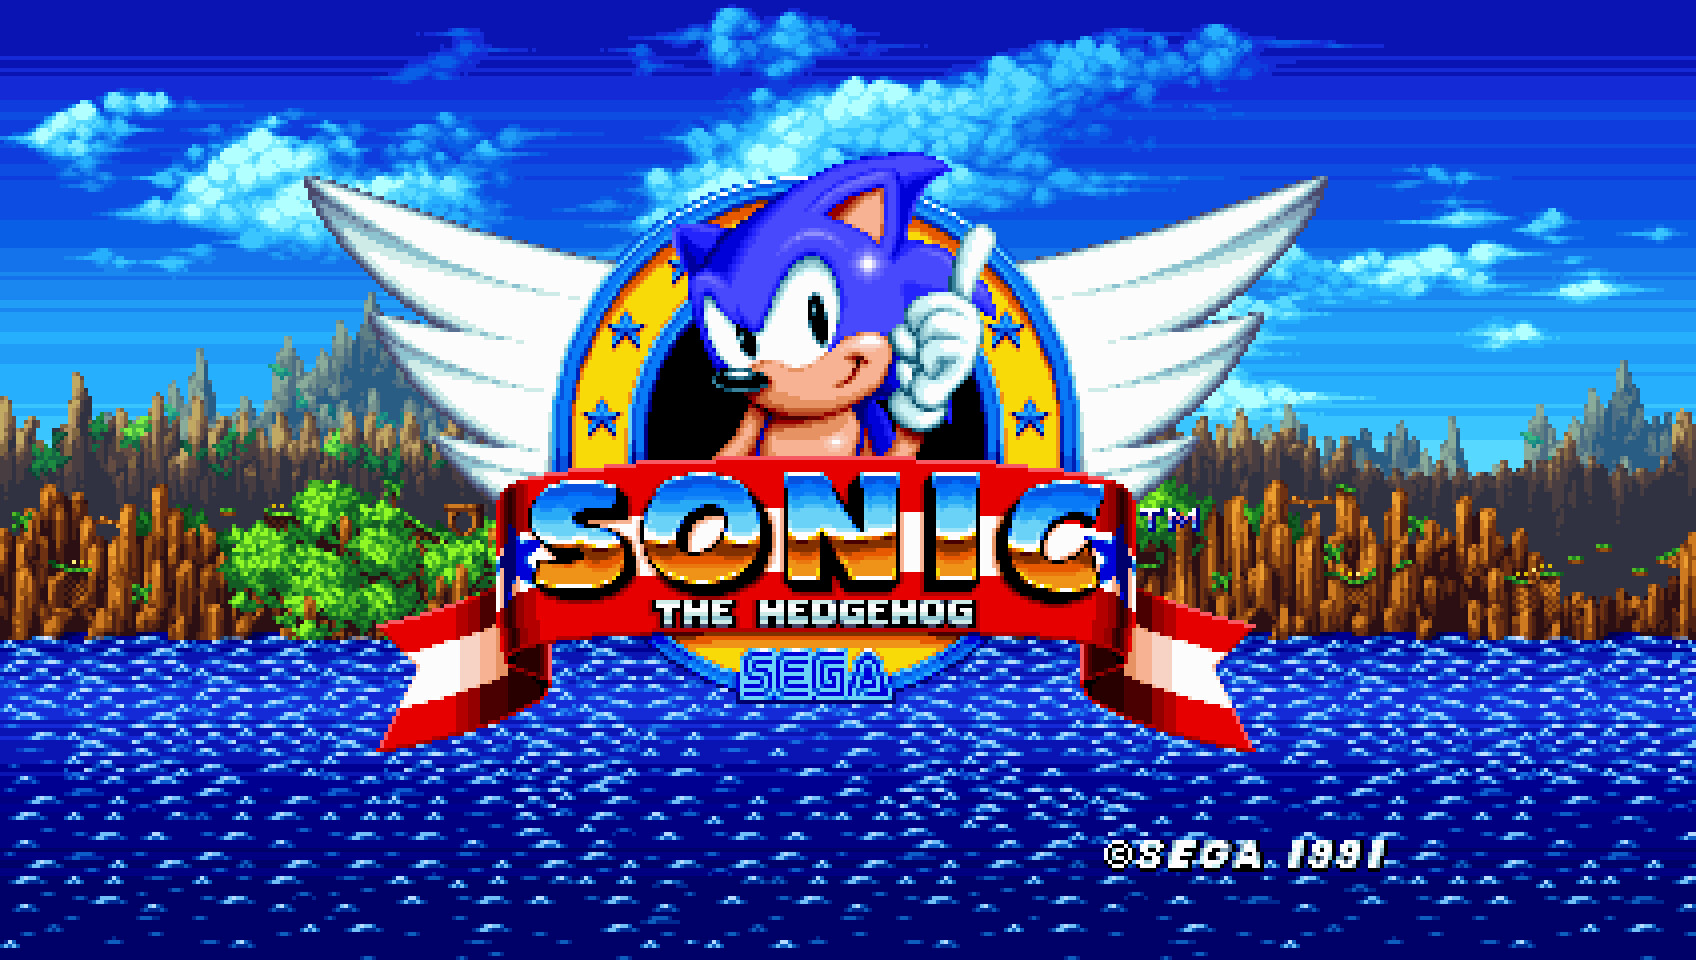 Sonic 1 Prototype Title Screen DreamWorld Style by